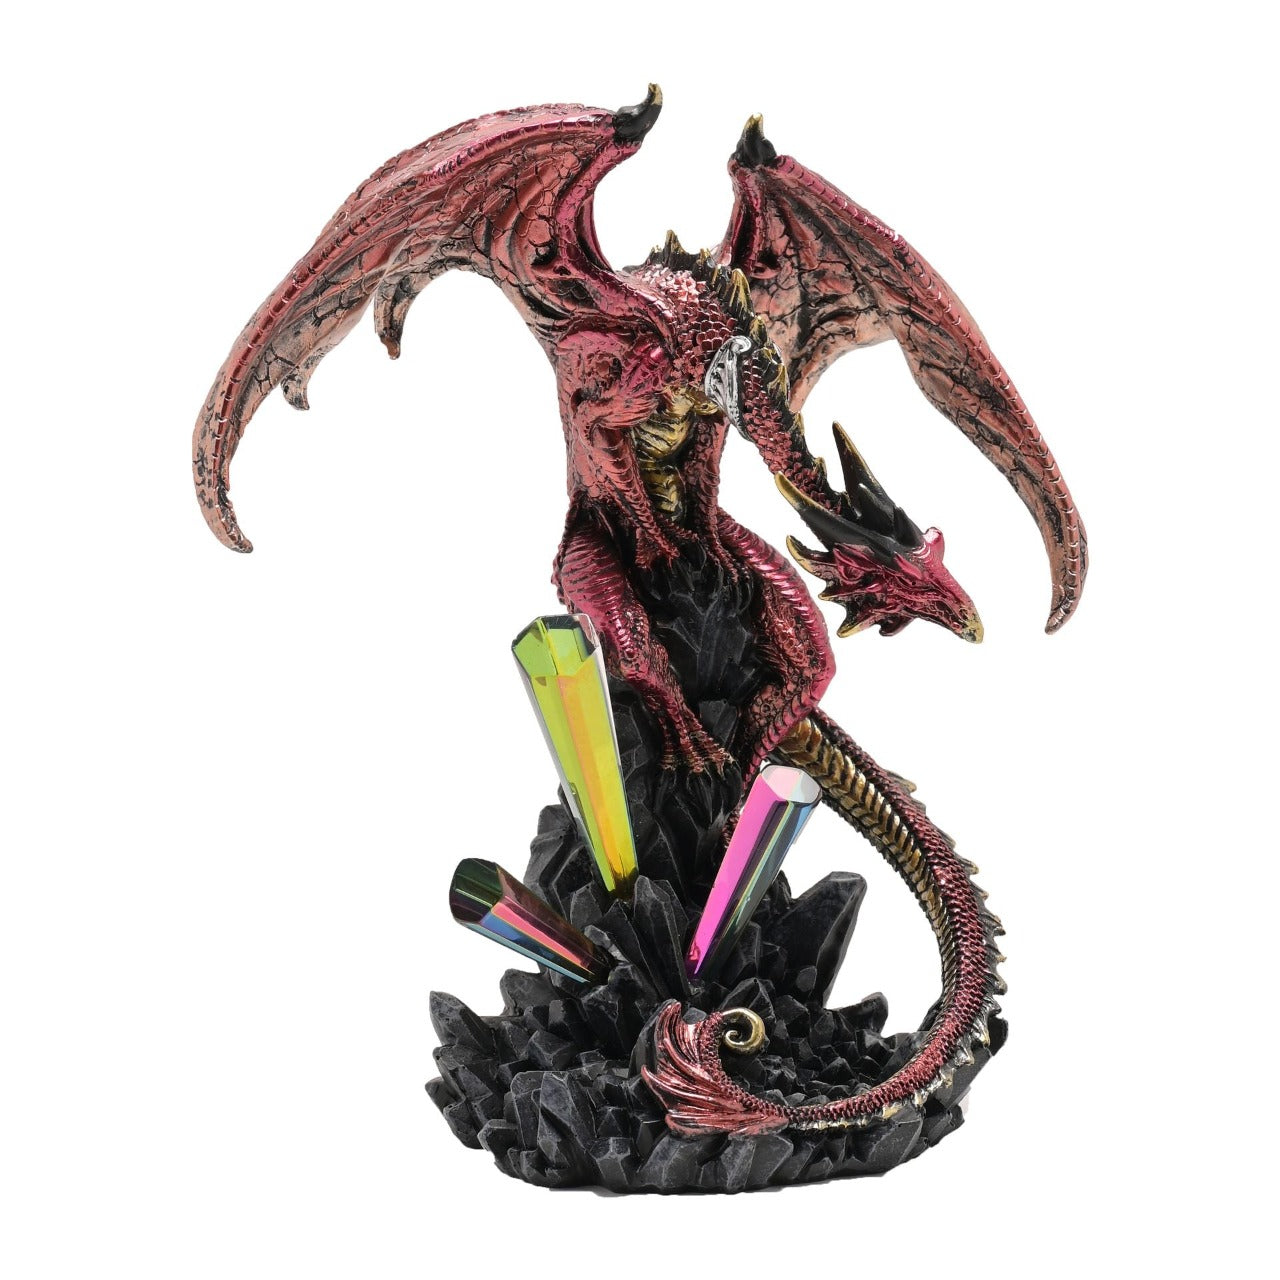 Red Dragon With Crystals Diorama Figurine  A red dragon with crystals diorama figurine by HOCUS POCUS NOVELTIES®.  This majestic figurine captures the mythical world of dragons for those obsessed with fantasy.